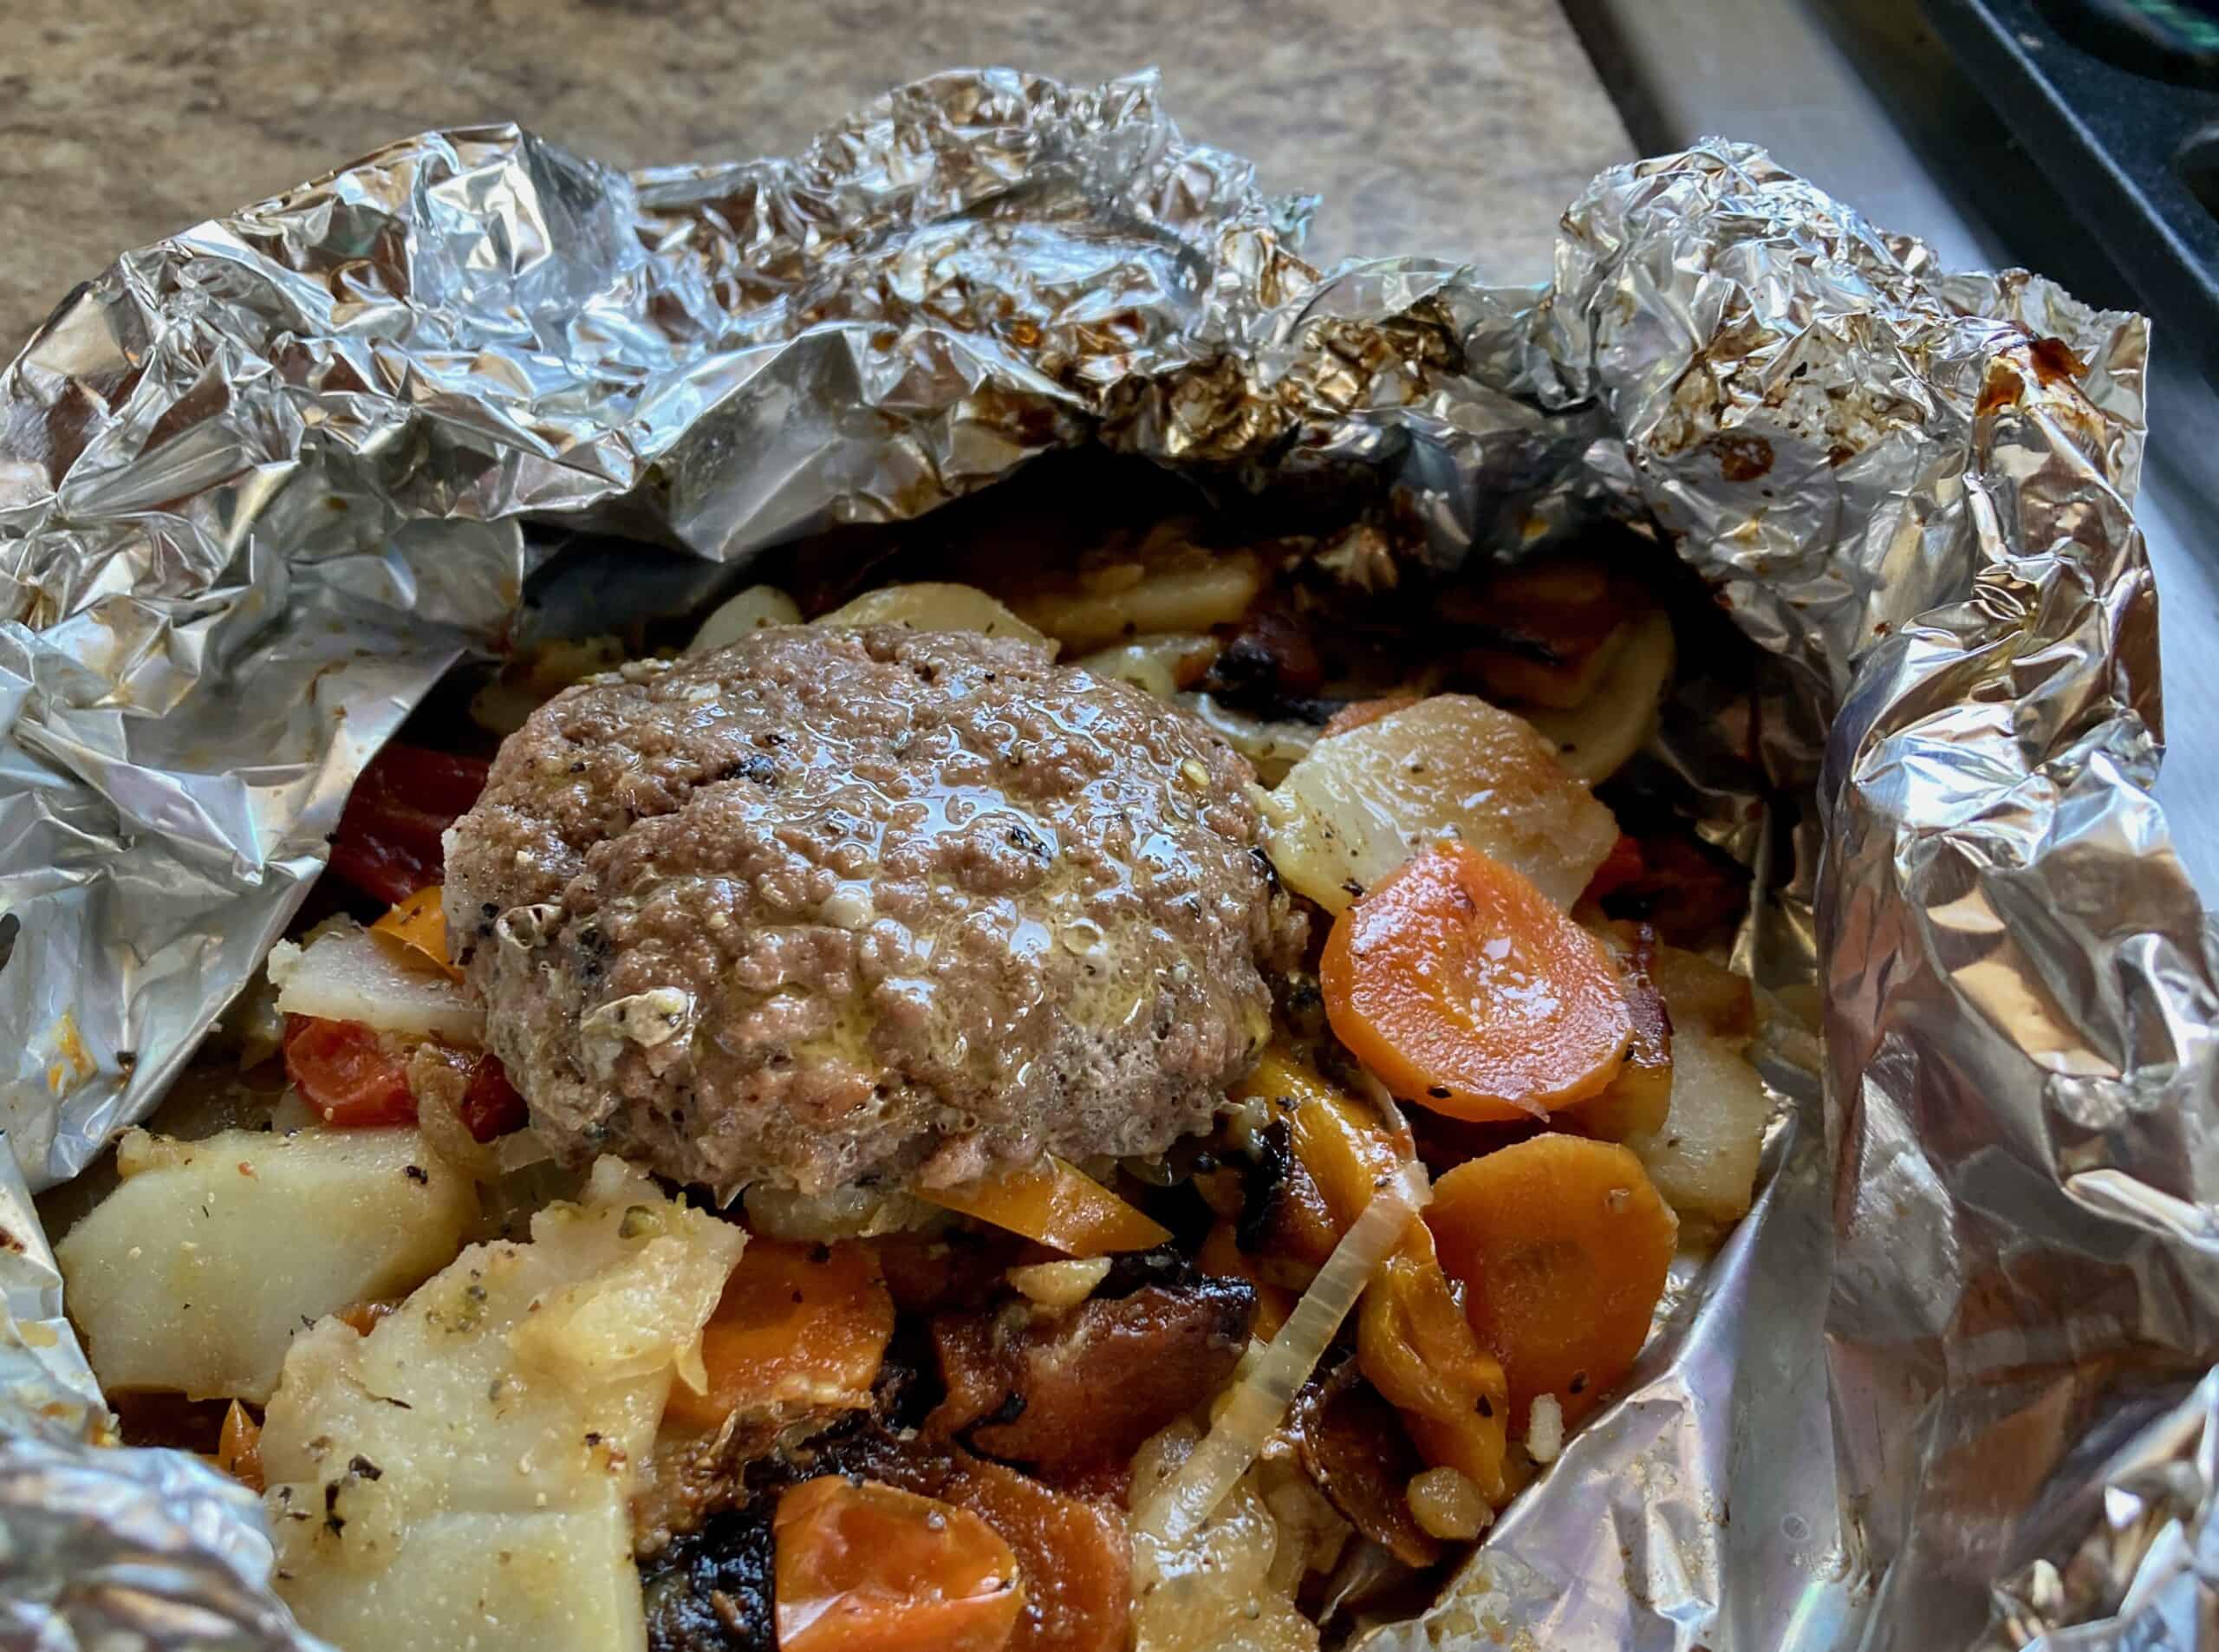 Hamburger & Vegetables Cooked in Foil Packet, Open & Ready to Eat